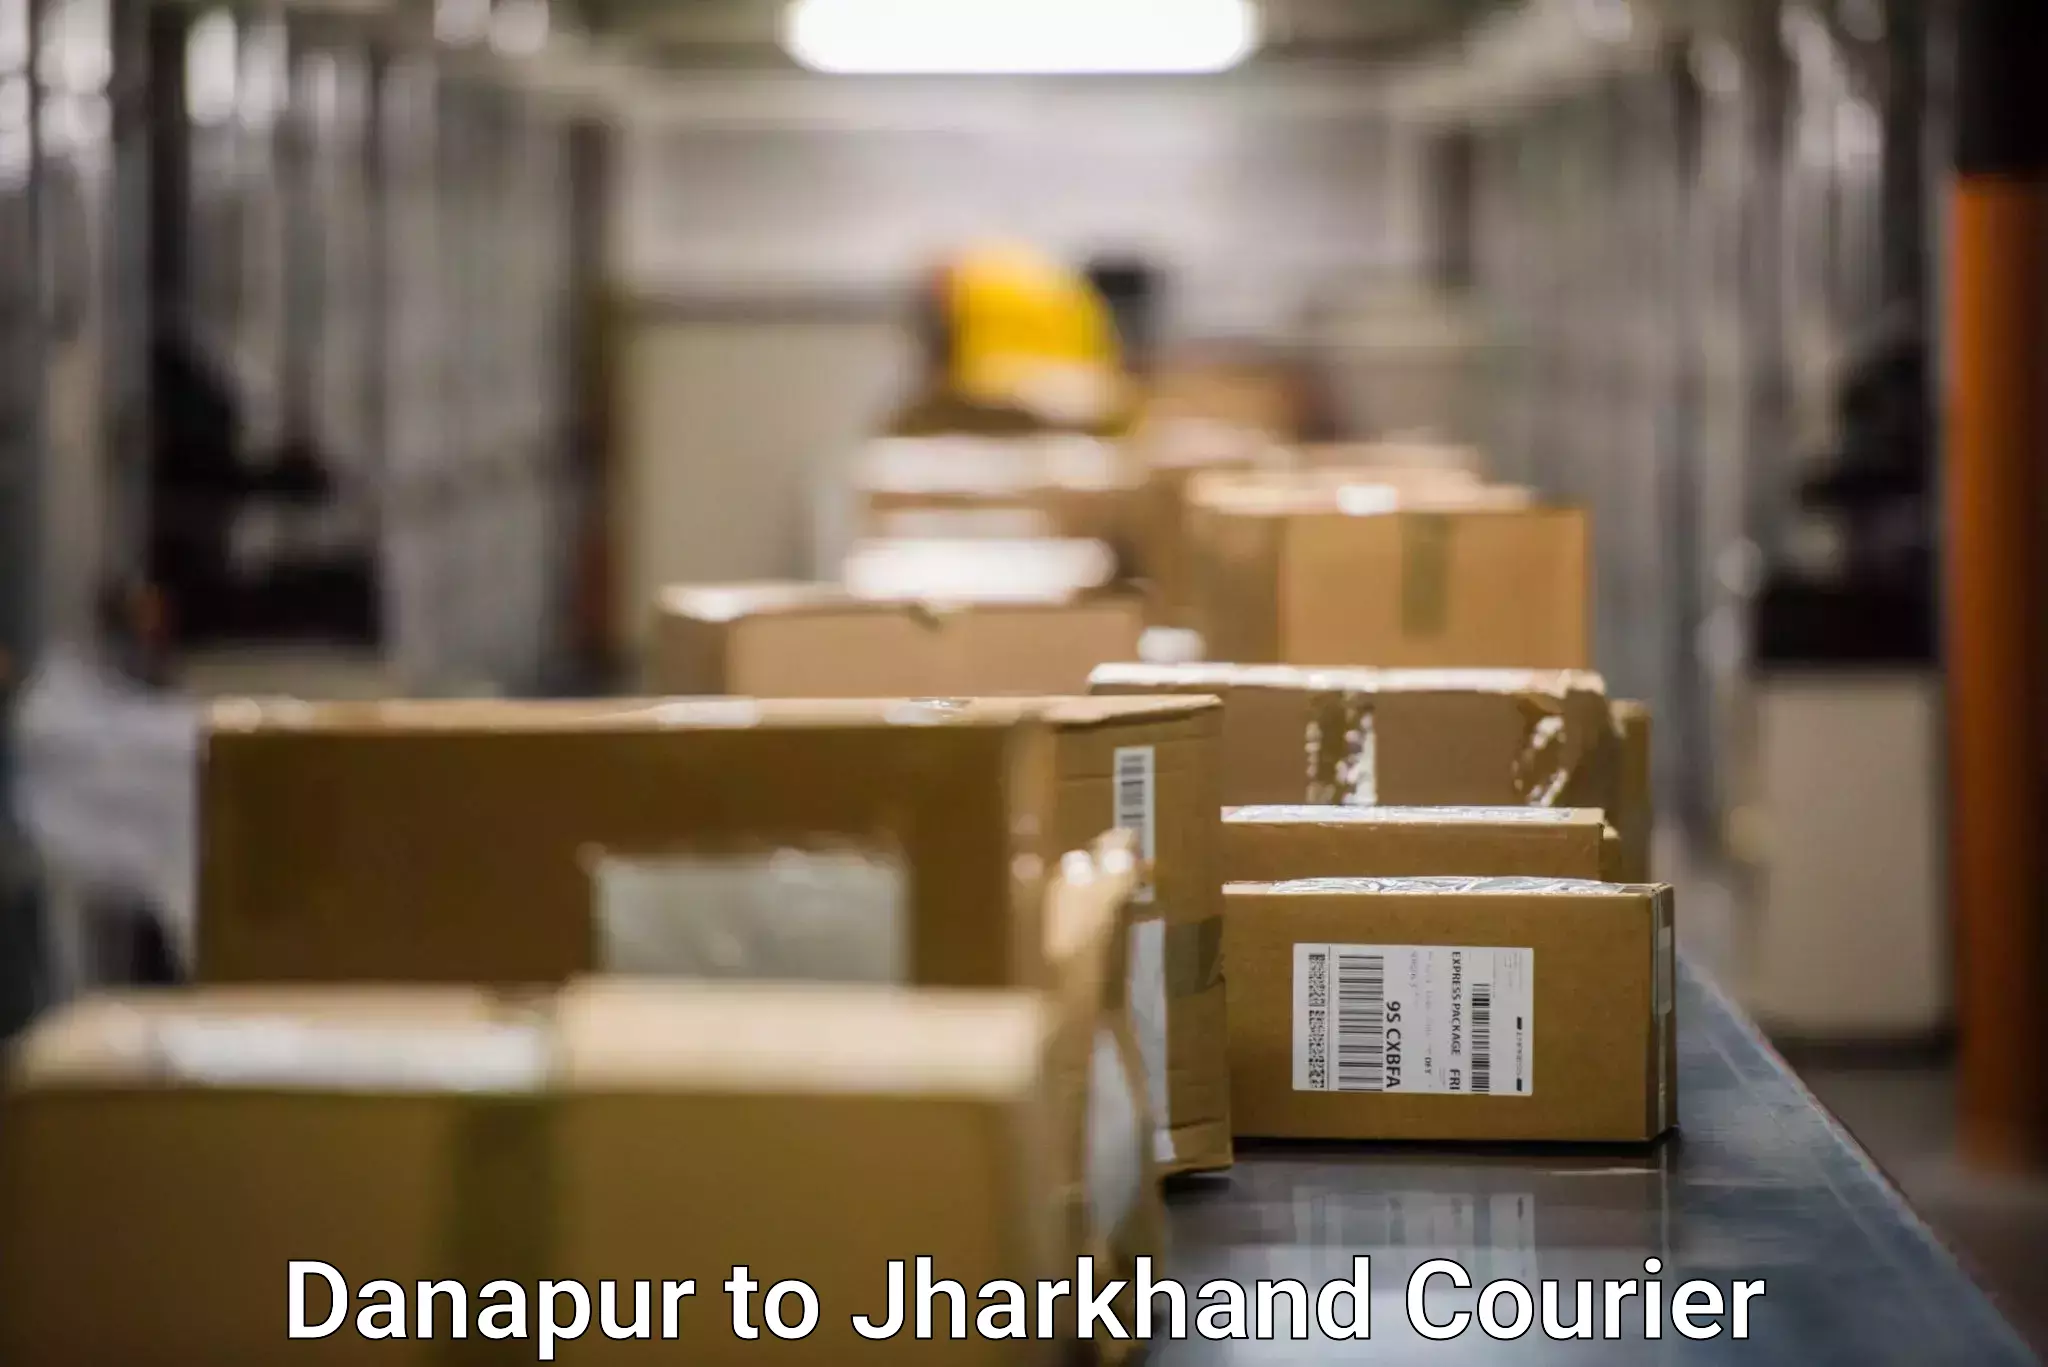 Small parcel delivery in Danapur to IIIT Ranchi